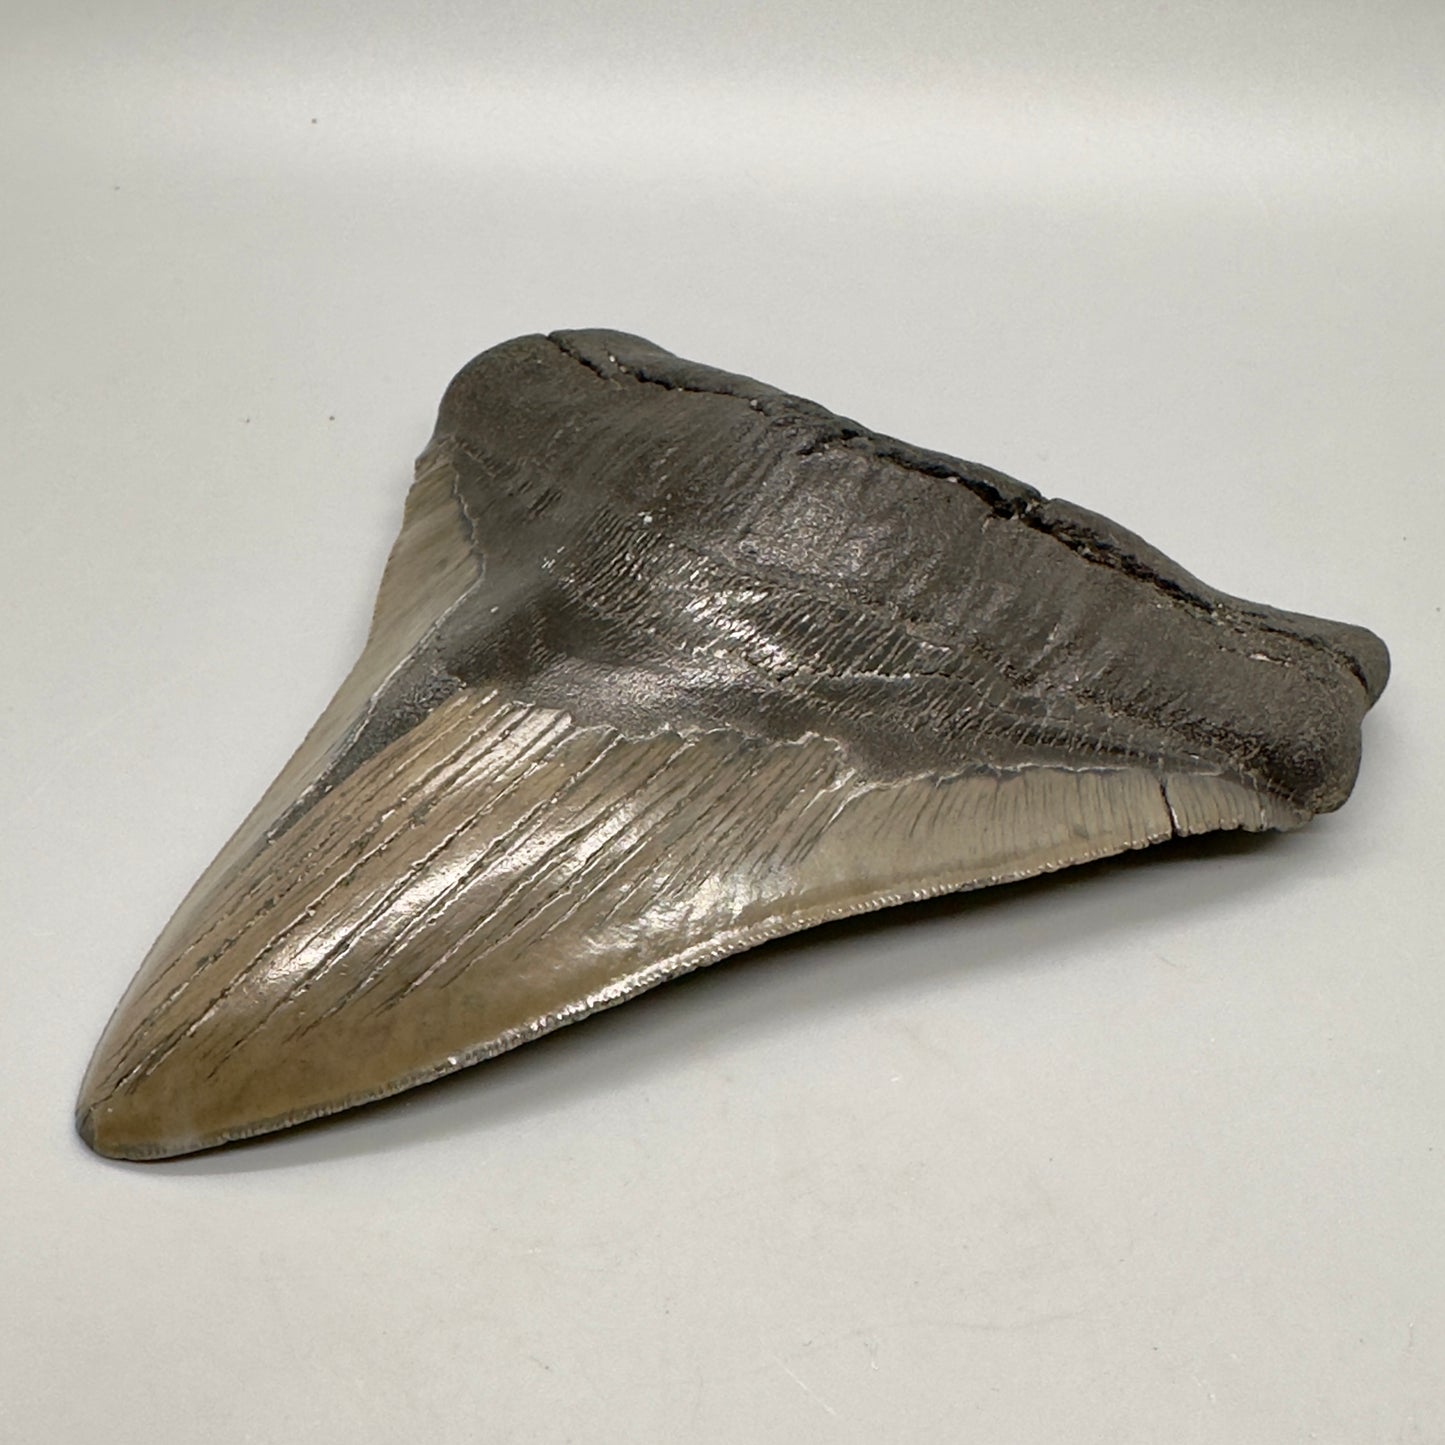 EXTRA LARGE 6.05" Fossil Megalodon Tooth: Scuba Diving Discovery from Southeast USA CM4606 - Front right